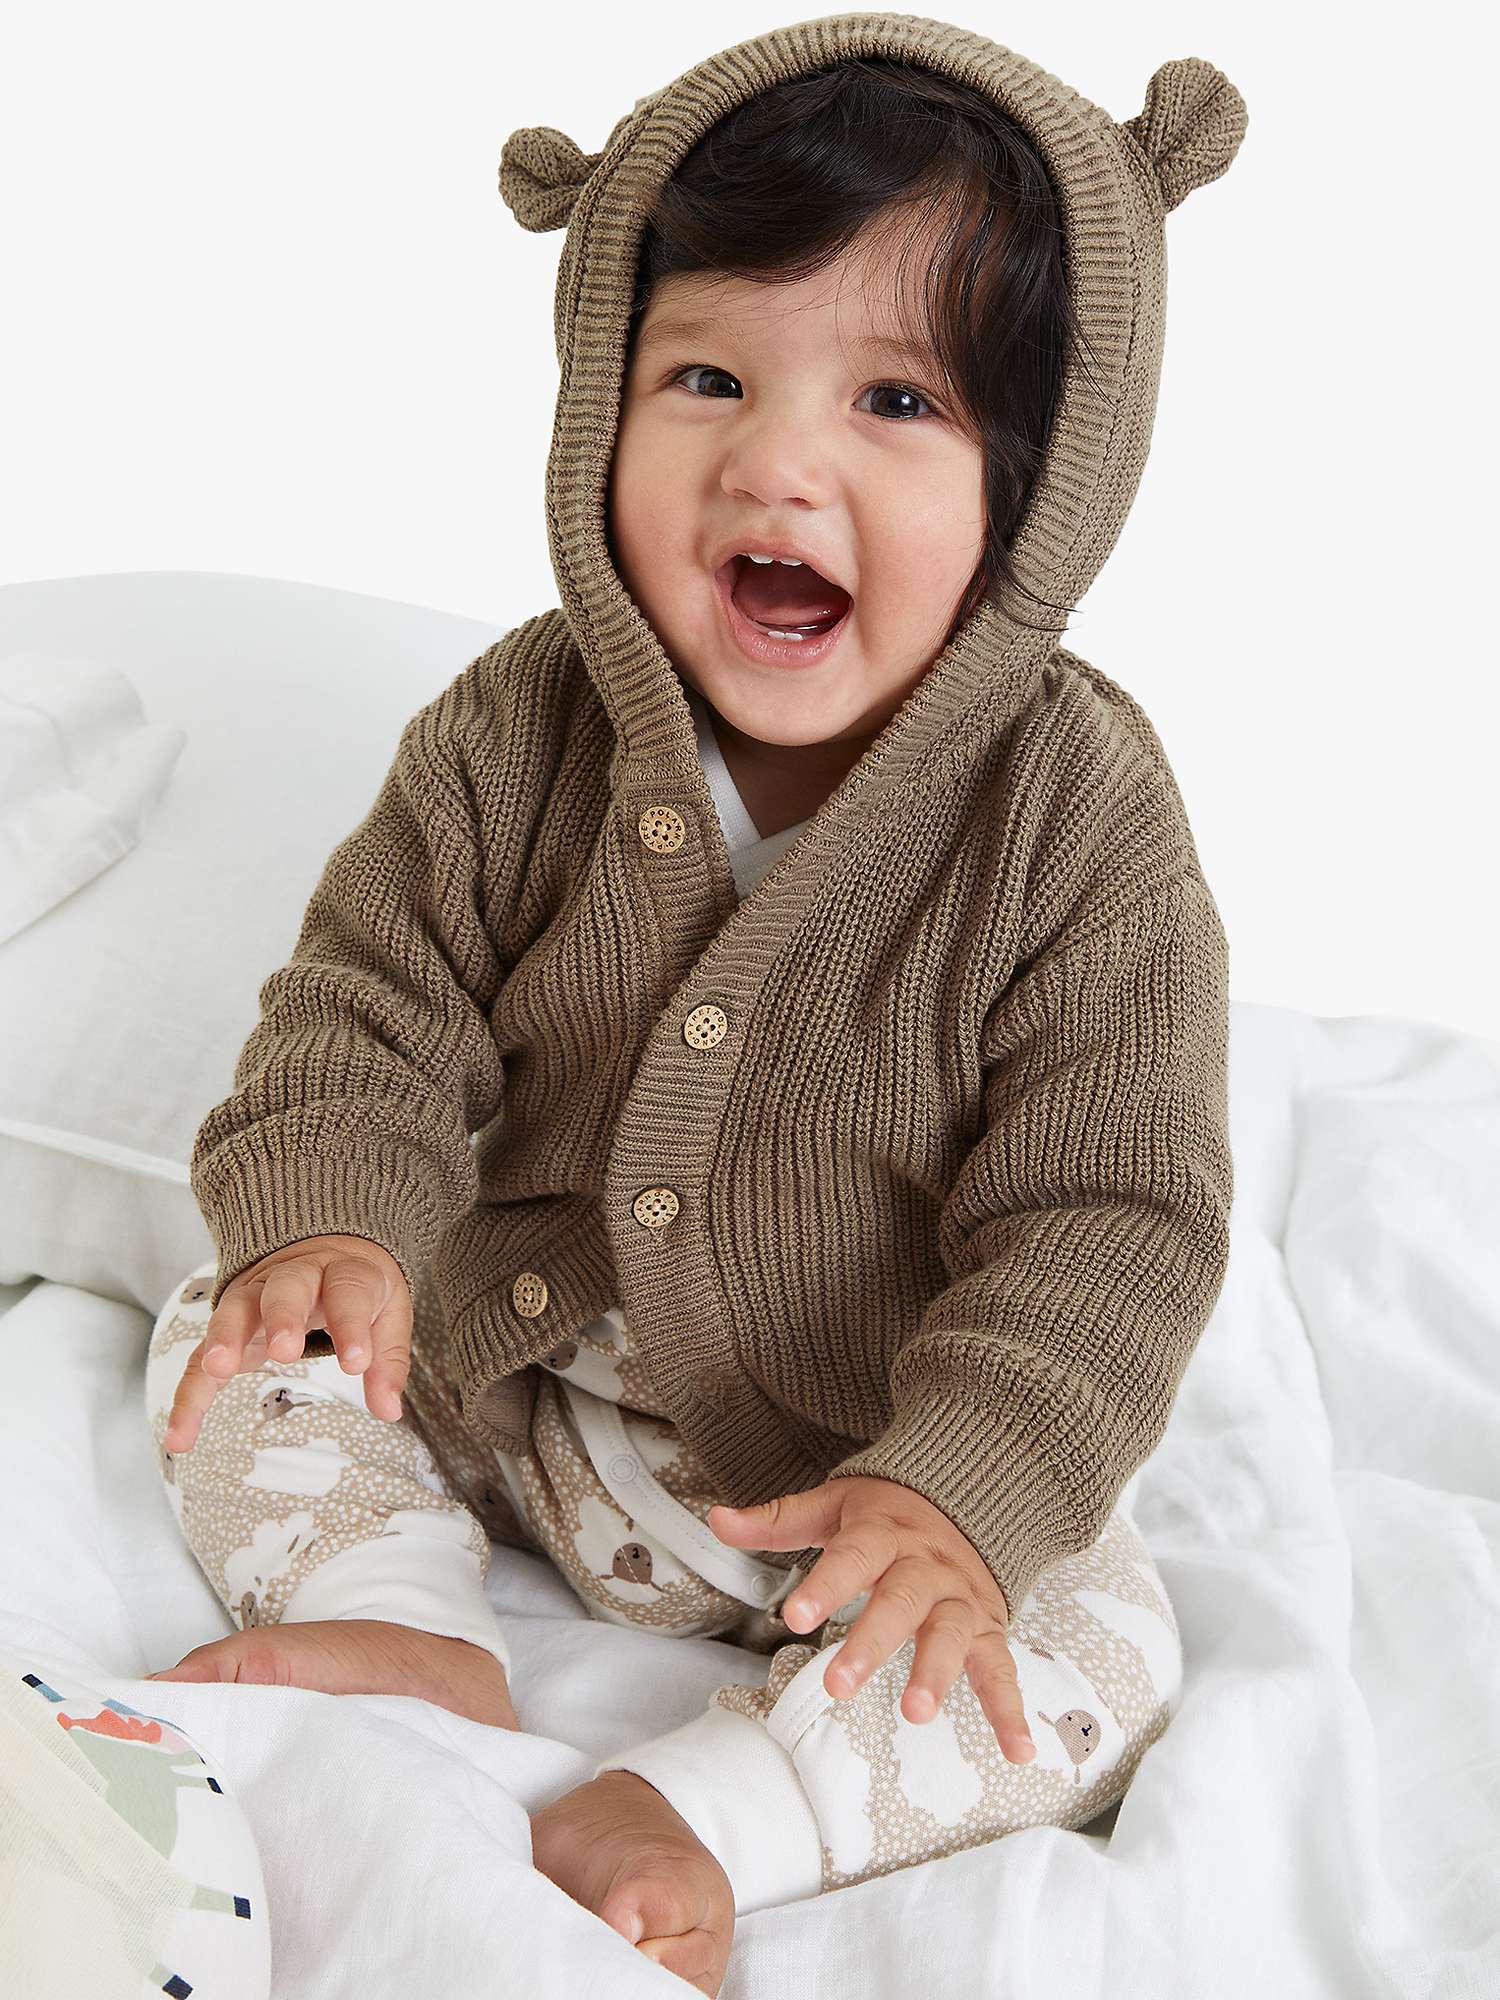 Buy Polarn O. Pyret Baby Organic Cotton Knitted Button Through Hoodie, Brown Online at johnlewis.com